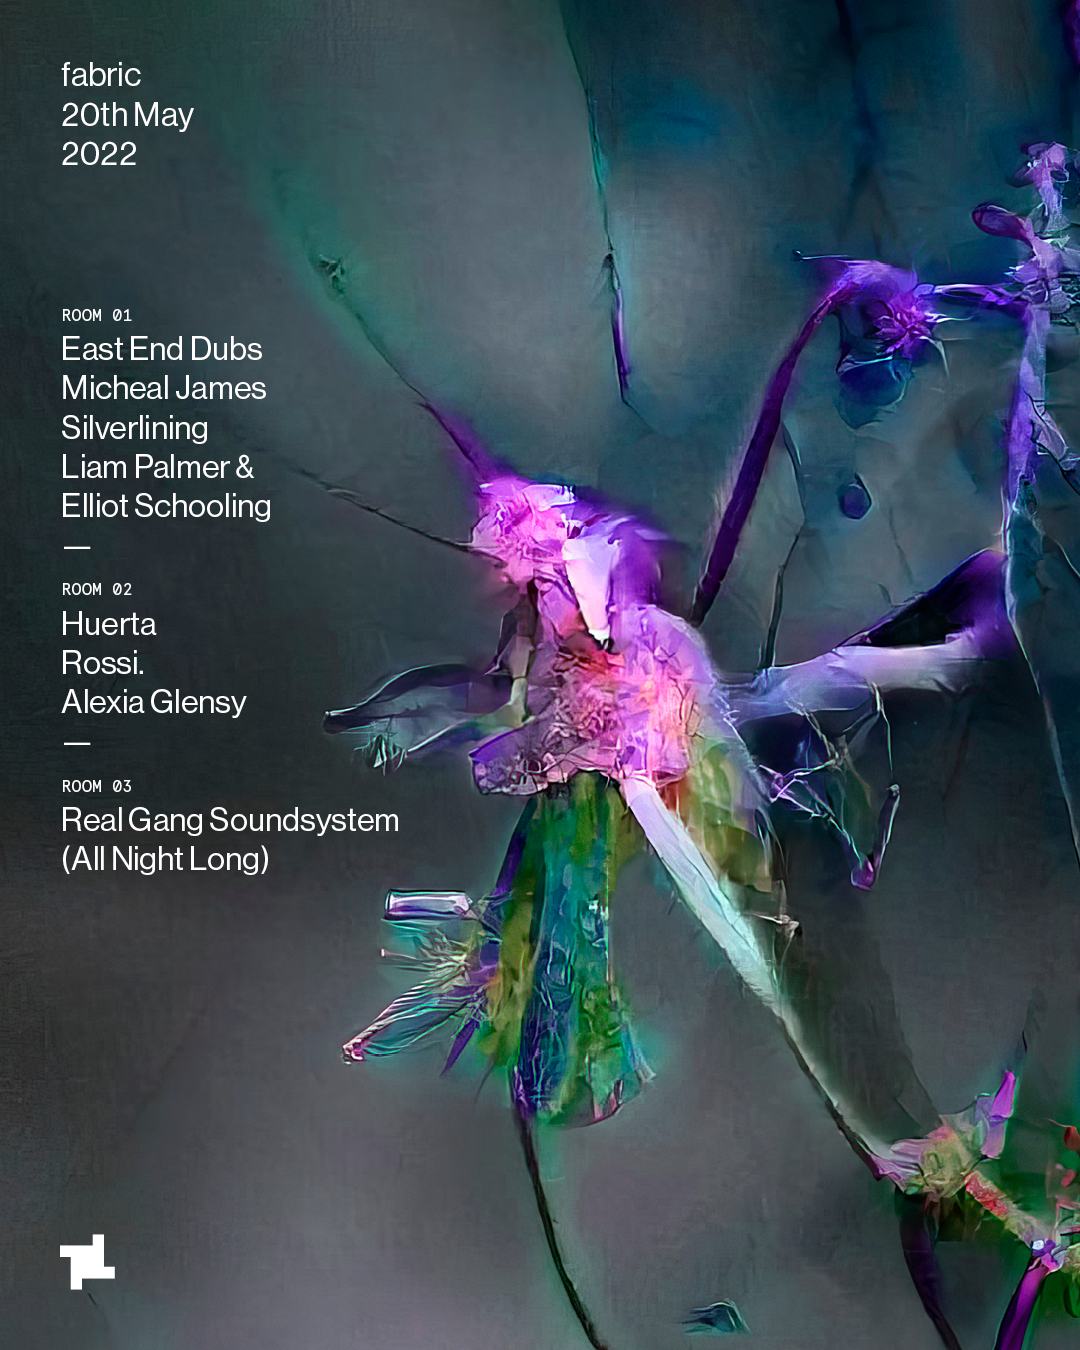 fabric: East End Dubs, Huerta, Rossi., Micheal James & More - Flyer front